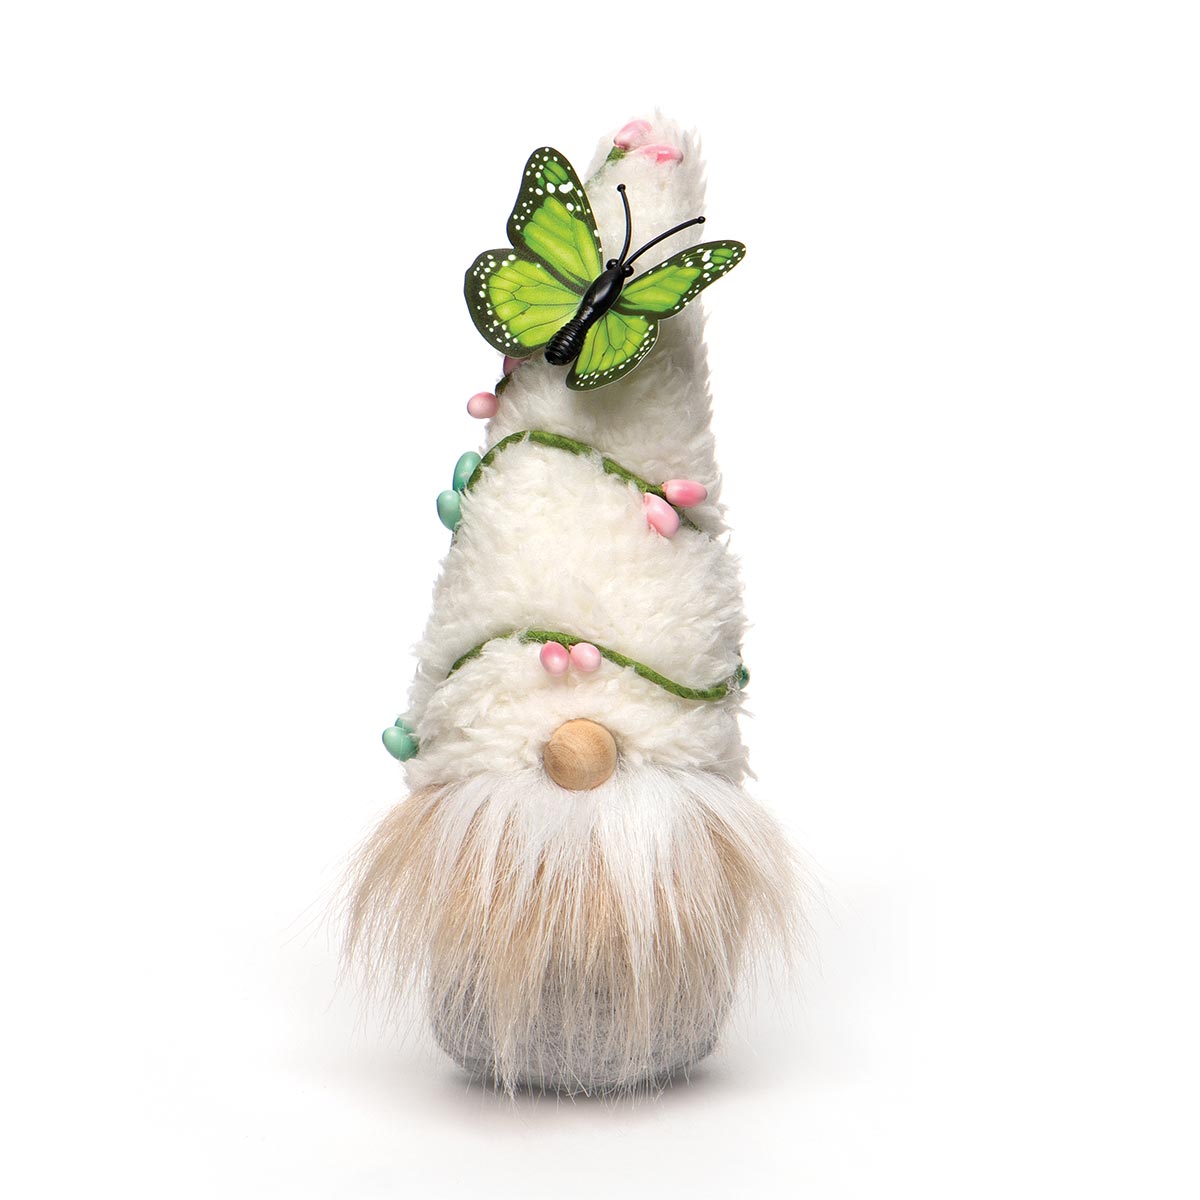 FAIRY GARDEN GNOME WITH FUZZY HAT WITH BERRY